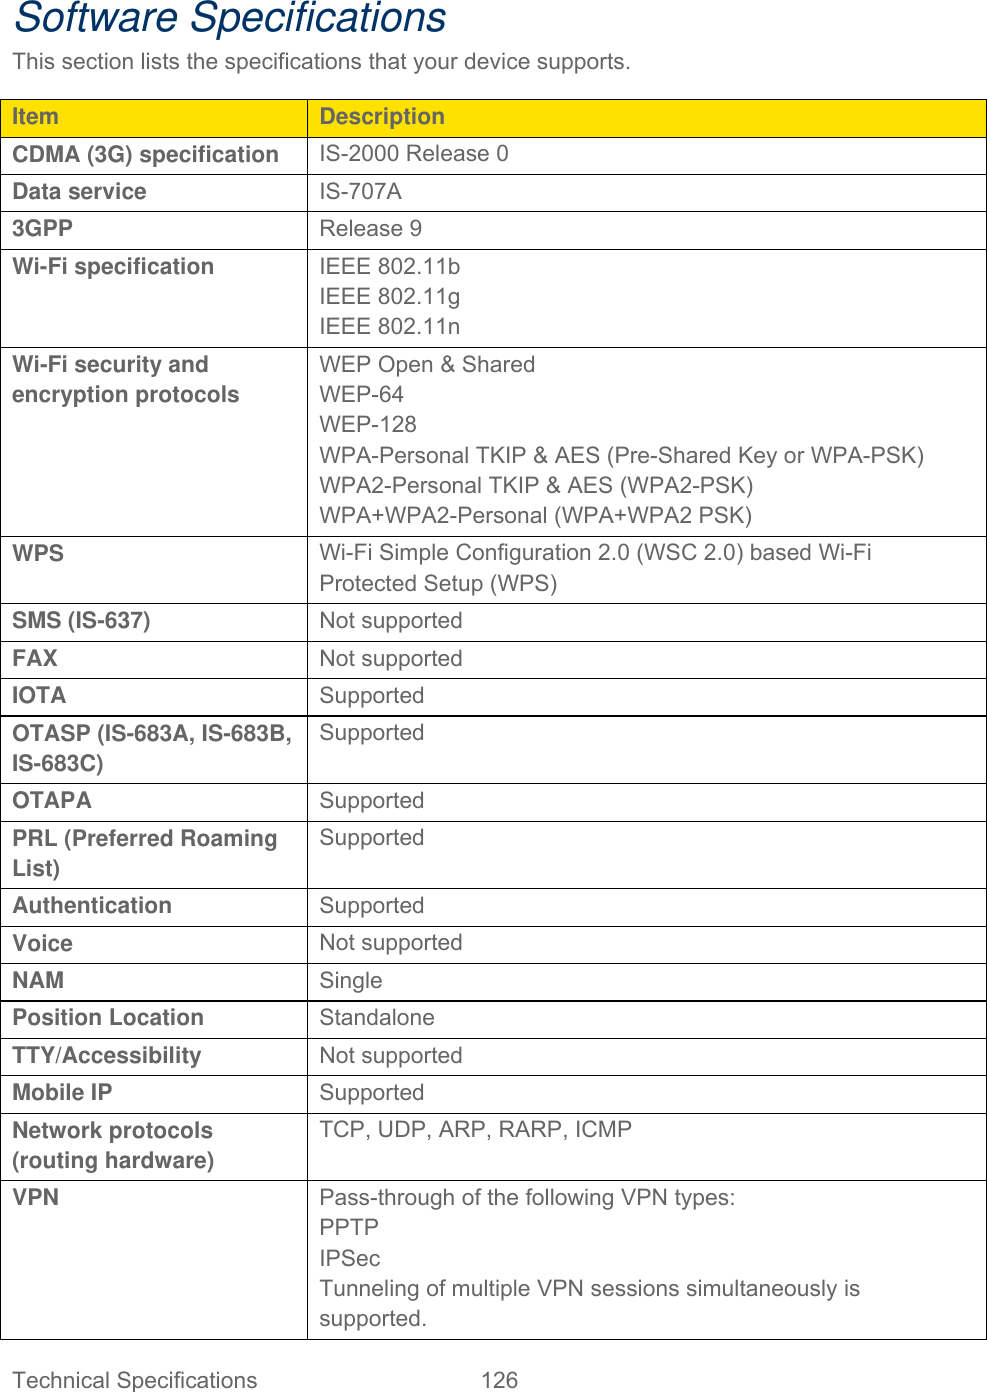 Technical Specifications  126   Software Specifications This section lists the specifications that your device supports. Item  Description CDMA (3G) specification  IS-2000 Release 0 Data service  IS-707A 3GPP  Release 9 Wi-Fi specification  IEEE 802.11b IEEE 802.11g IEEE 802.11n Wi-Fi security and encryption protocols WEP Open &amp; Shared WEP-64 WEP-128 WPA-Personal TKIP &amp; AES (Pre-Shared Key or WPA-PSK) WPA2-Personal TKIP &amp; AES (WPA2-PSK) WPA+WPA2-Personal (WPA+WPA2 PSK) WPS  Wi-Fi Simple Configuration 2.0 (WSC 2.0) based Wi-Fi Protected Setup (WPS) SMS (IS-637)  Not supported FAX  Not supported IOTA  Supported OTASP (IS-683A, IS-683B, IS-683C) Supported OTAPA  Supported PRL (Preferred Roaming List) Supported Authentication  Supported Voice  Not supported NAM  Single Position Location  Standalone TTY/Accessibility  Not supported Mobile IP  Supported Network protocols (routing hardware) TCP, UDP, ARP, RARP, ICMP  VPN  Pass-through of the following VPN types:  PPTP IPSec Tunneling of multiple VPN sessions simultaneously is supported. 